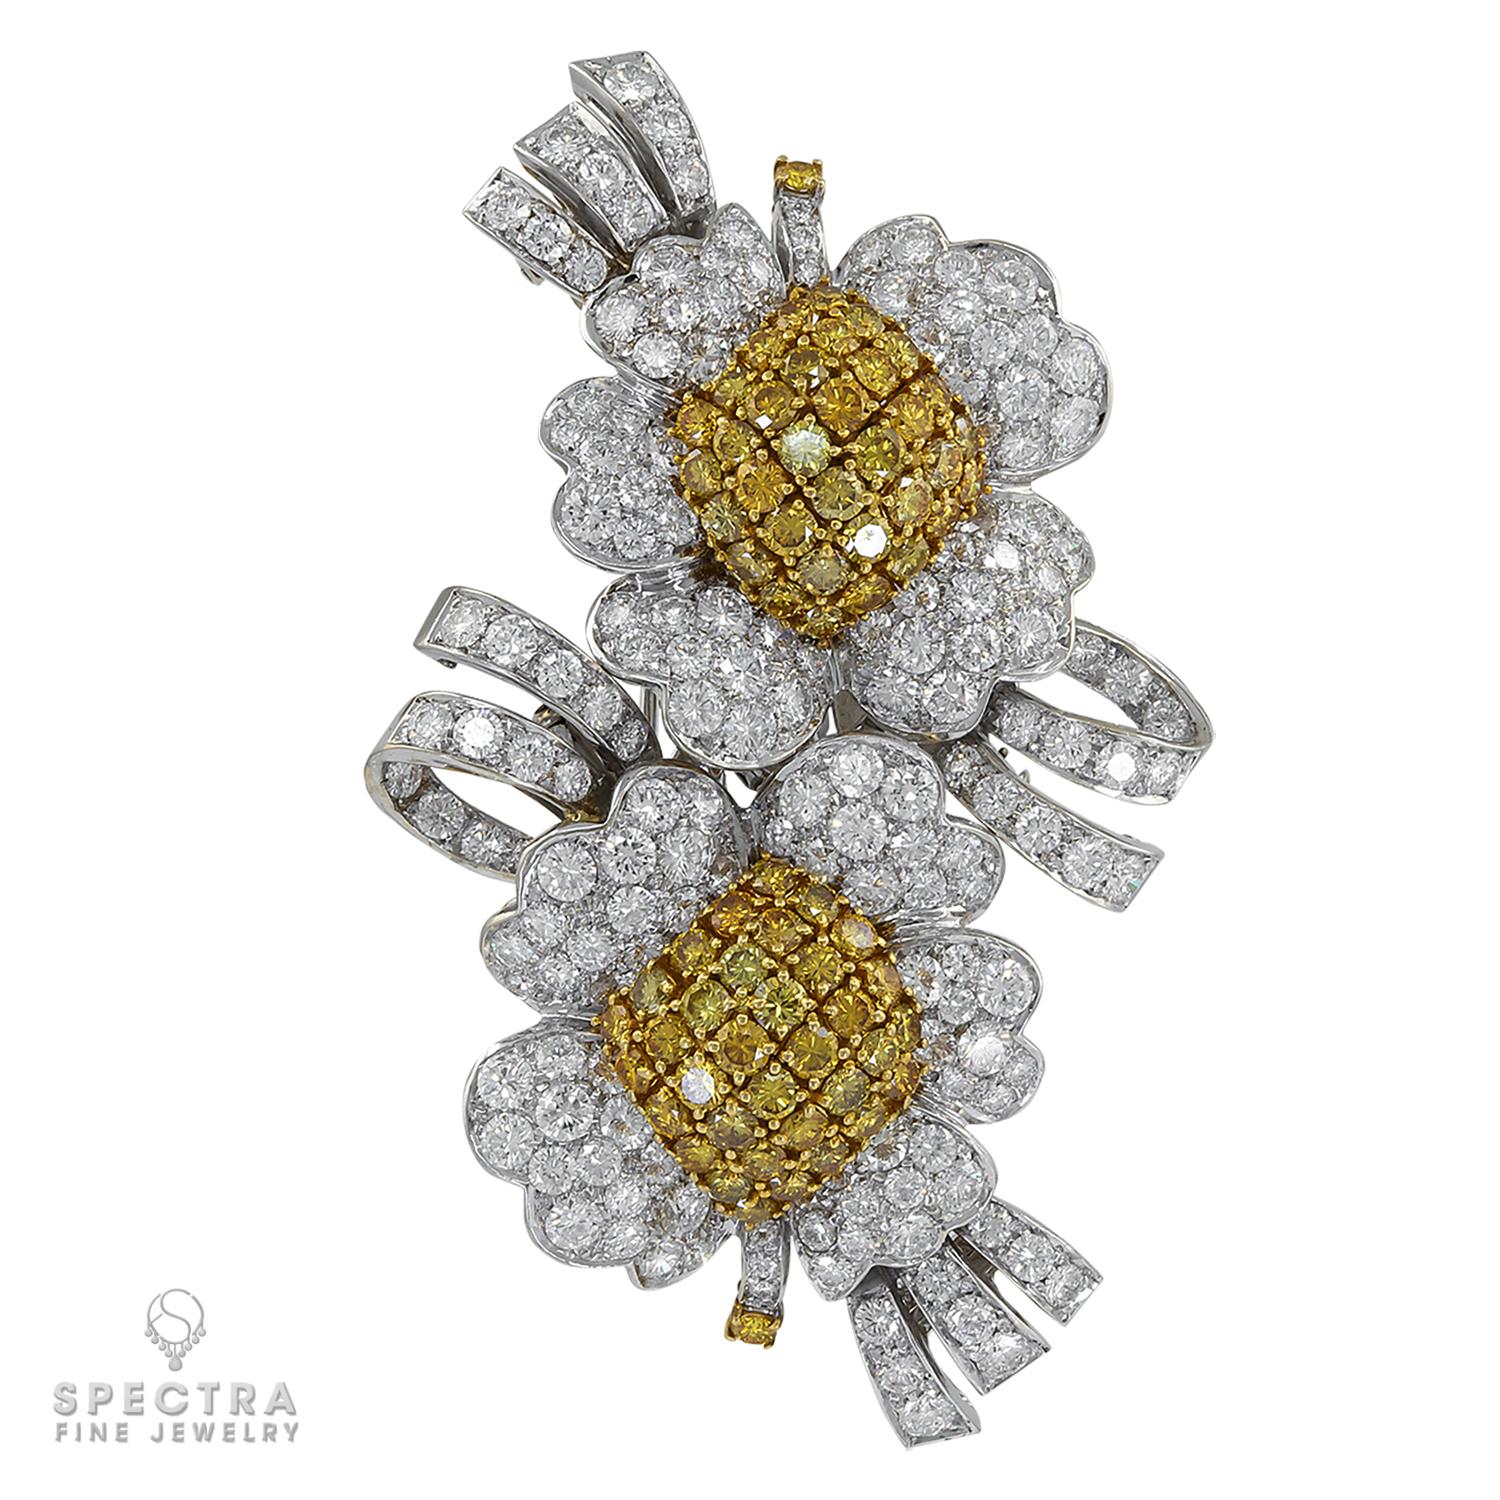 Although made in the late 20th century, circa 1990s, this Vintage Diamond Blossom Convertible Double Clip Brooch is expertly hand fabricated with the same rigorous attention paid to the details of its Jazz Age counterparts. The piece appears to be a